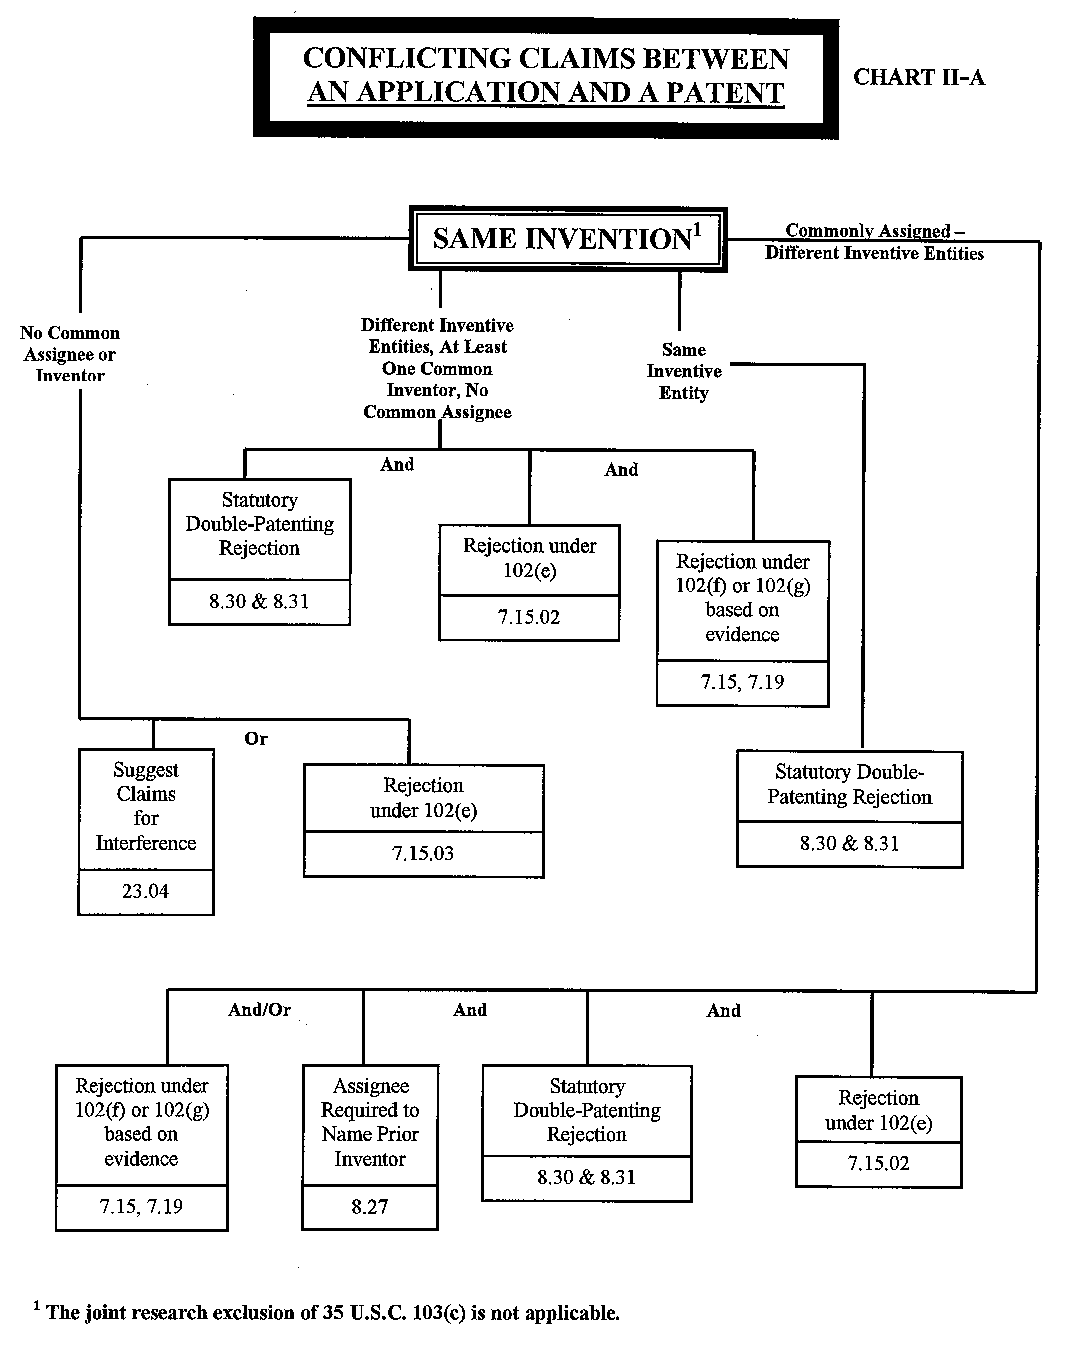 flowchart for an application and a patent, same invention, with conflicting claims